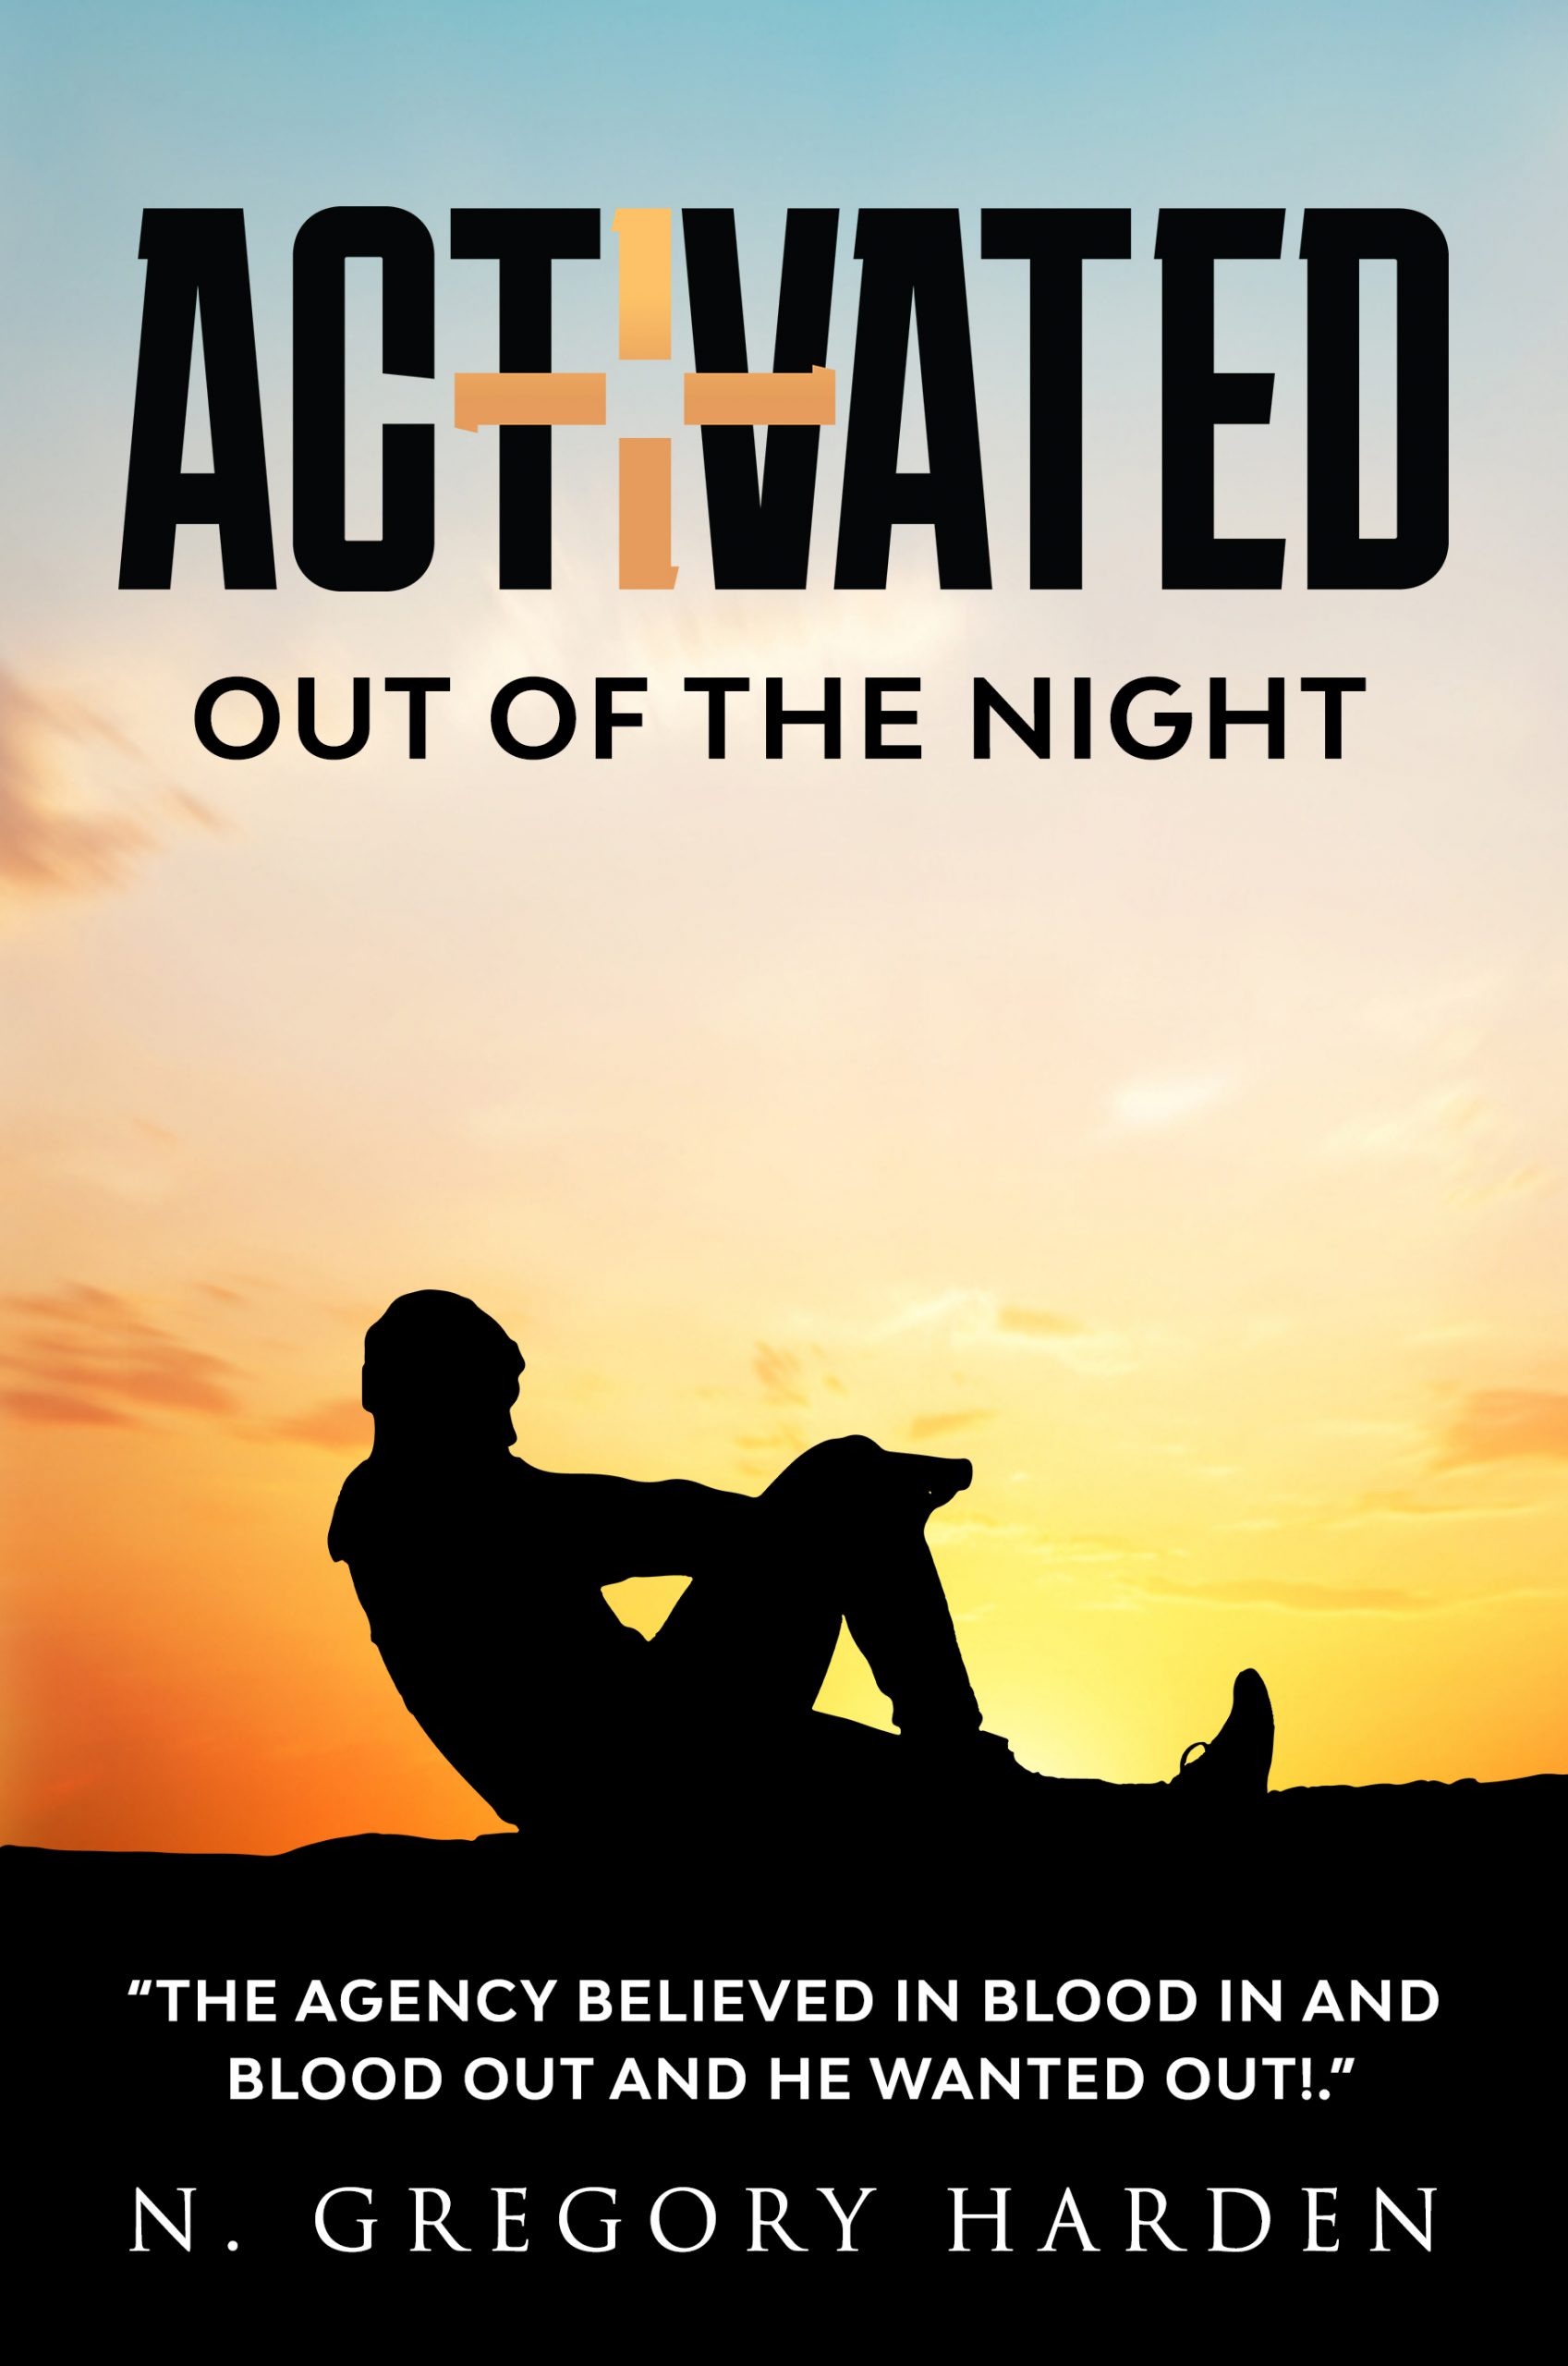 Activated: Out of the Night